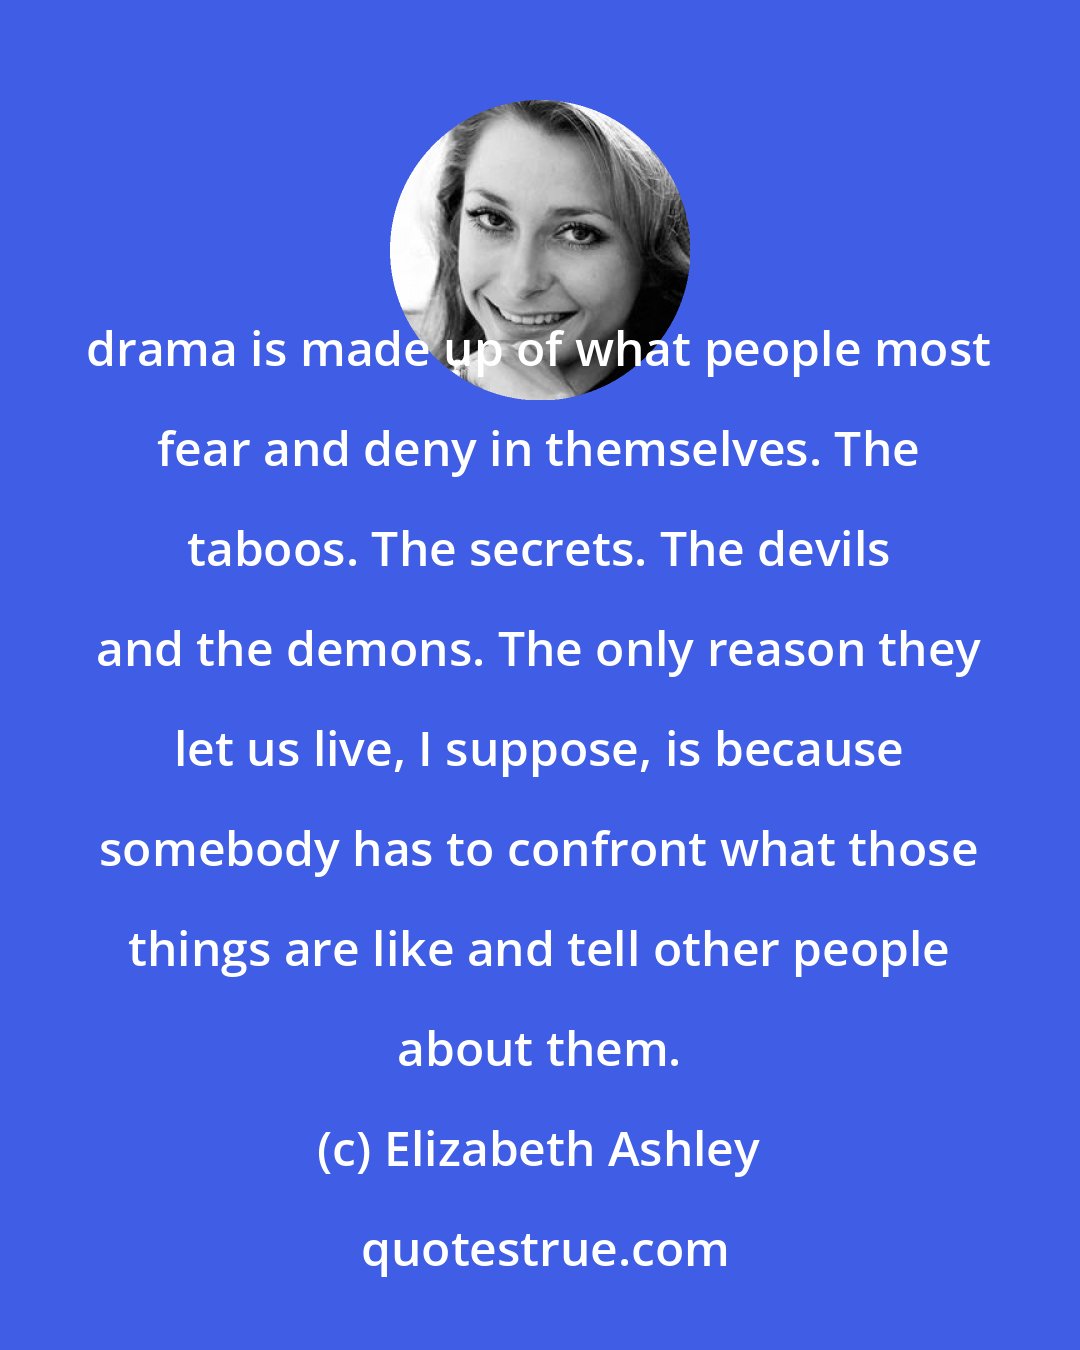 Elizabeth Ashley: drama is made up of what people most fear and deny in themselves. The taboos. The secrets. The devils and the demons. The only reason they let us live, I suppose, is because somebody has to confront what those things are like and tell other people about them.